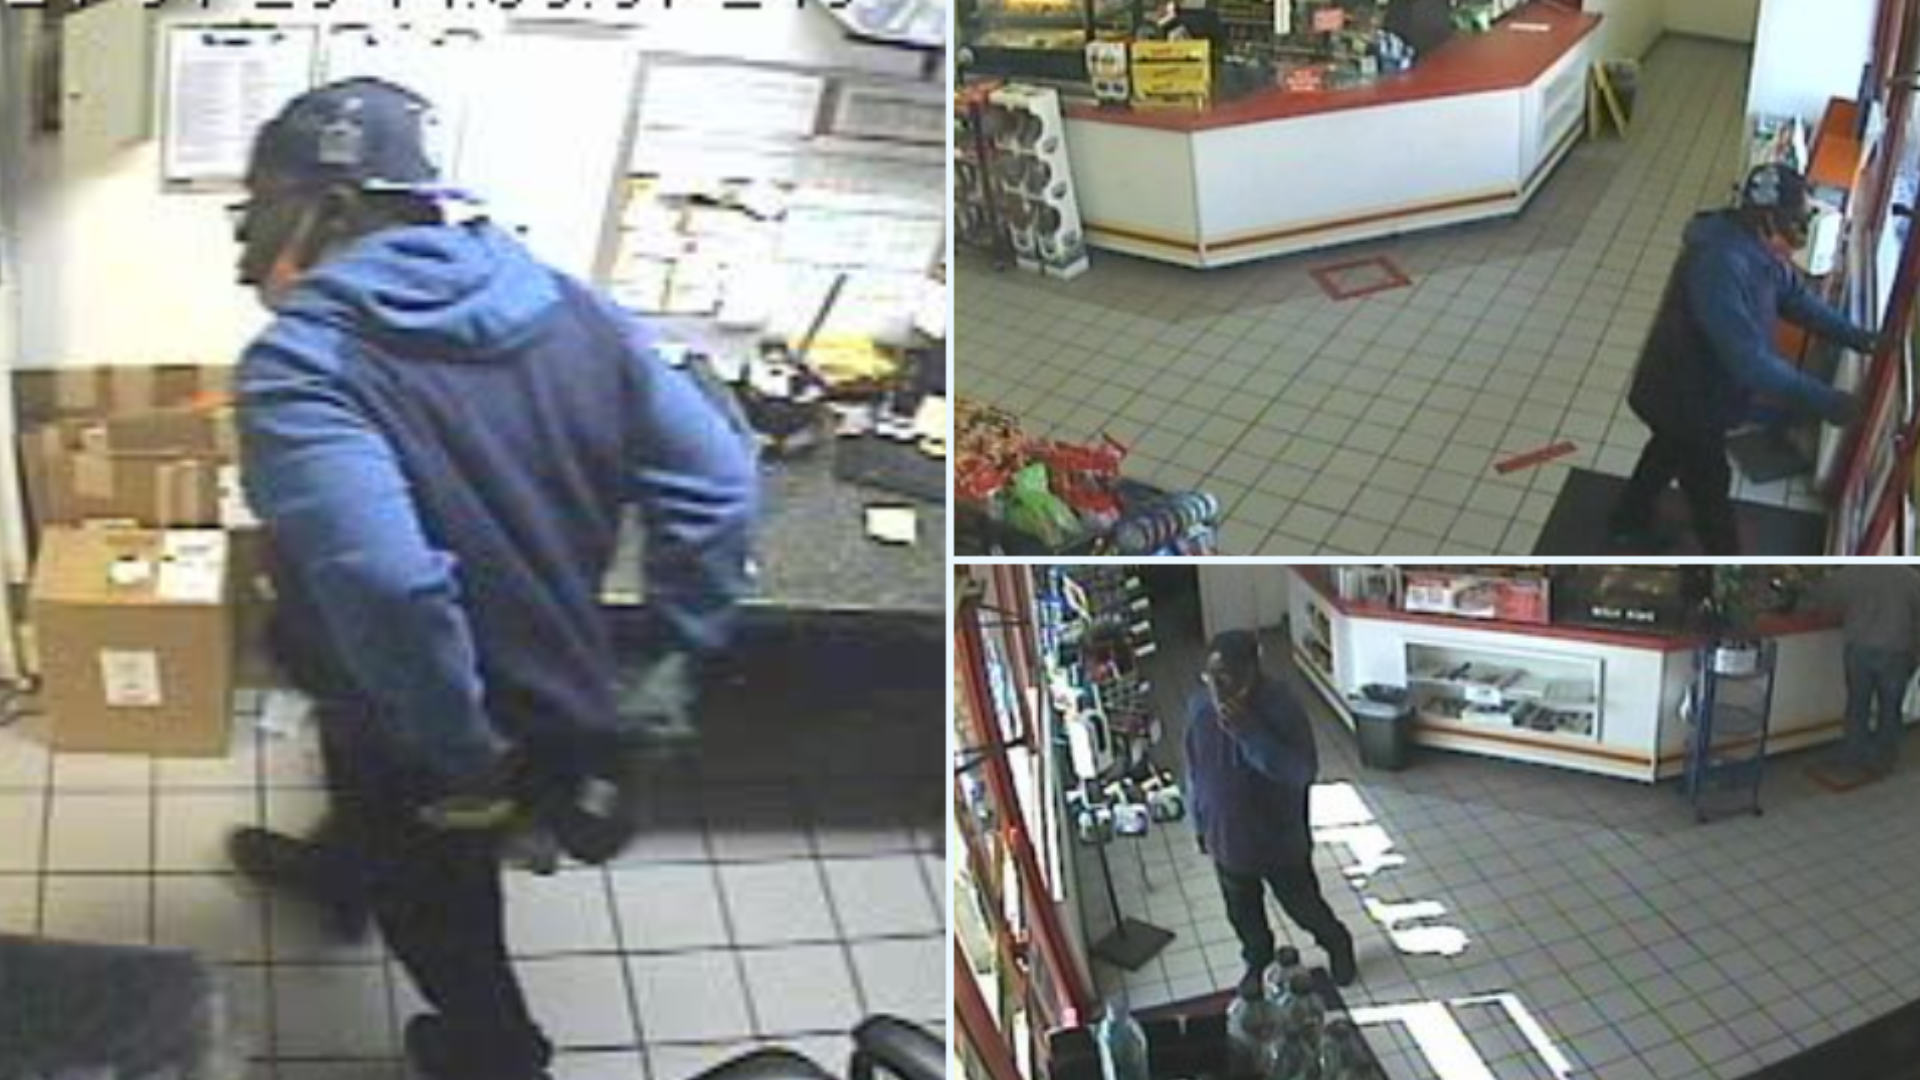 The suspect allegedly stole $7,000 from a CEFCO on Jan. 29.